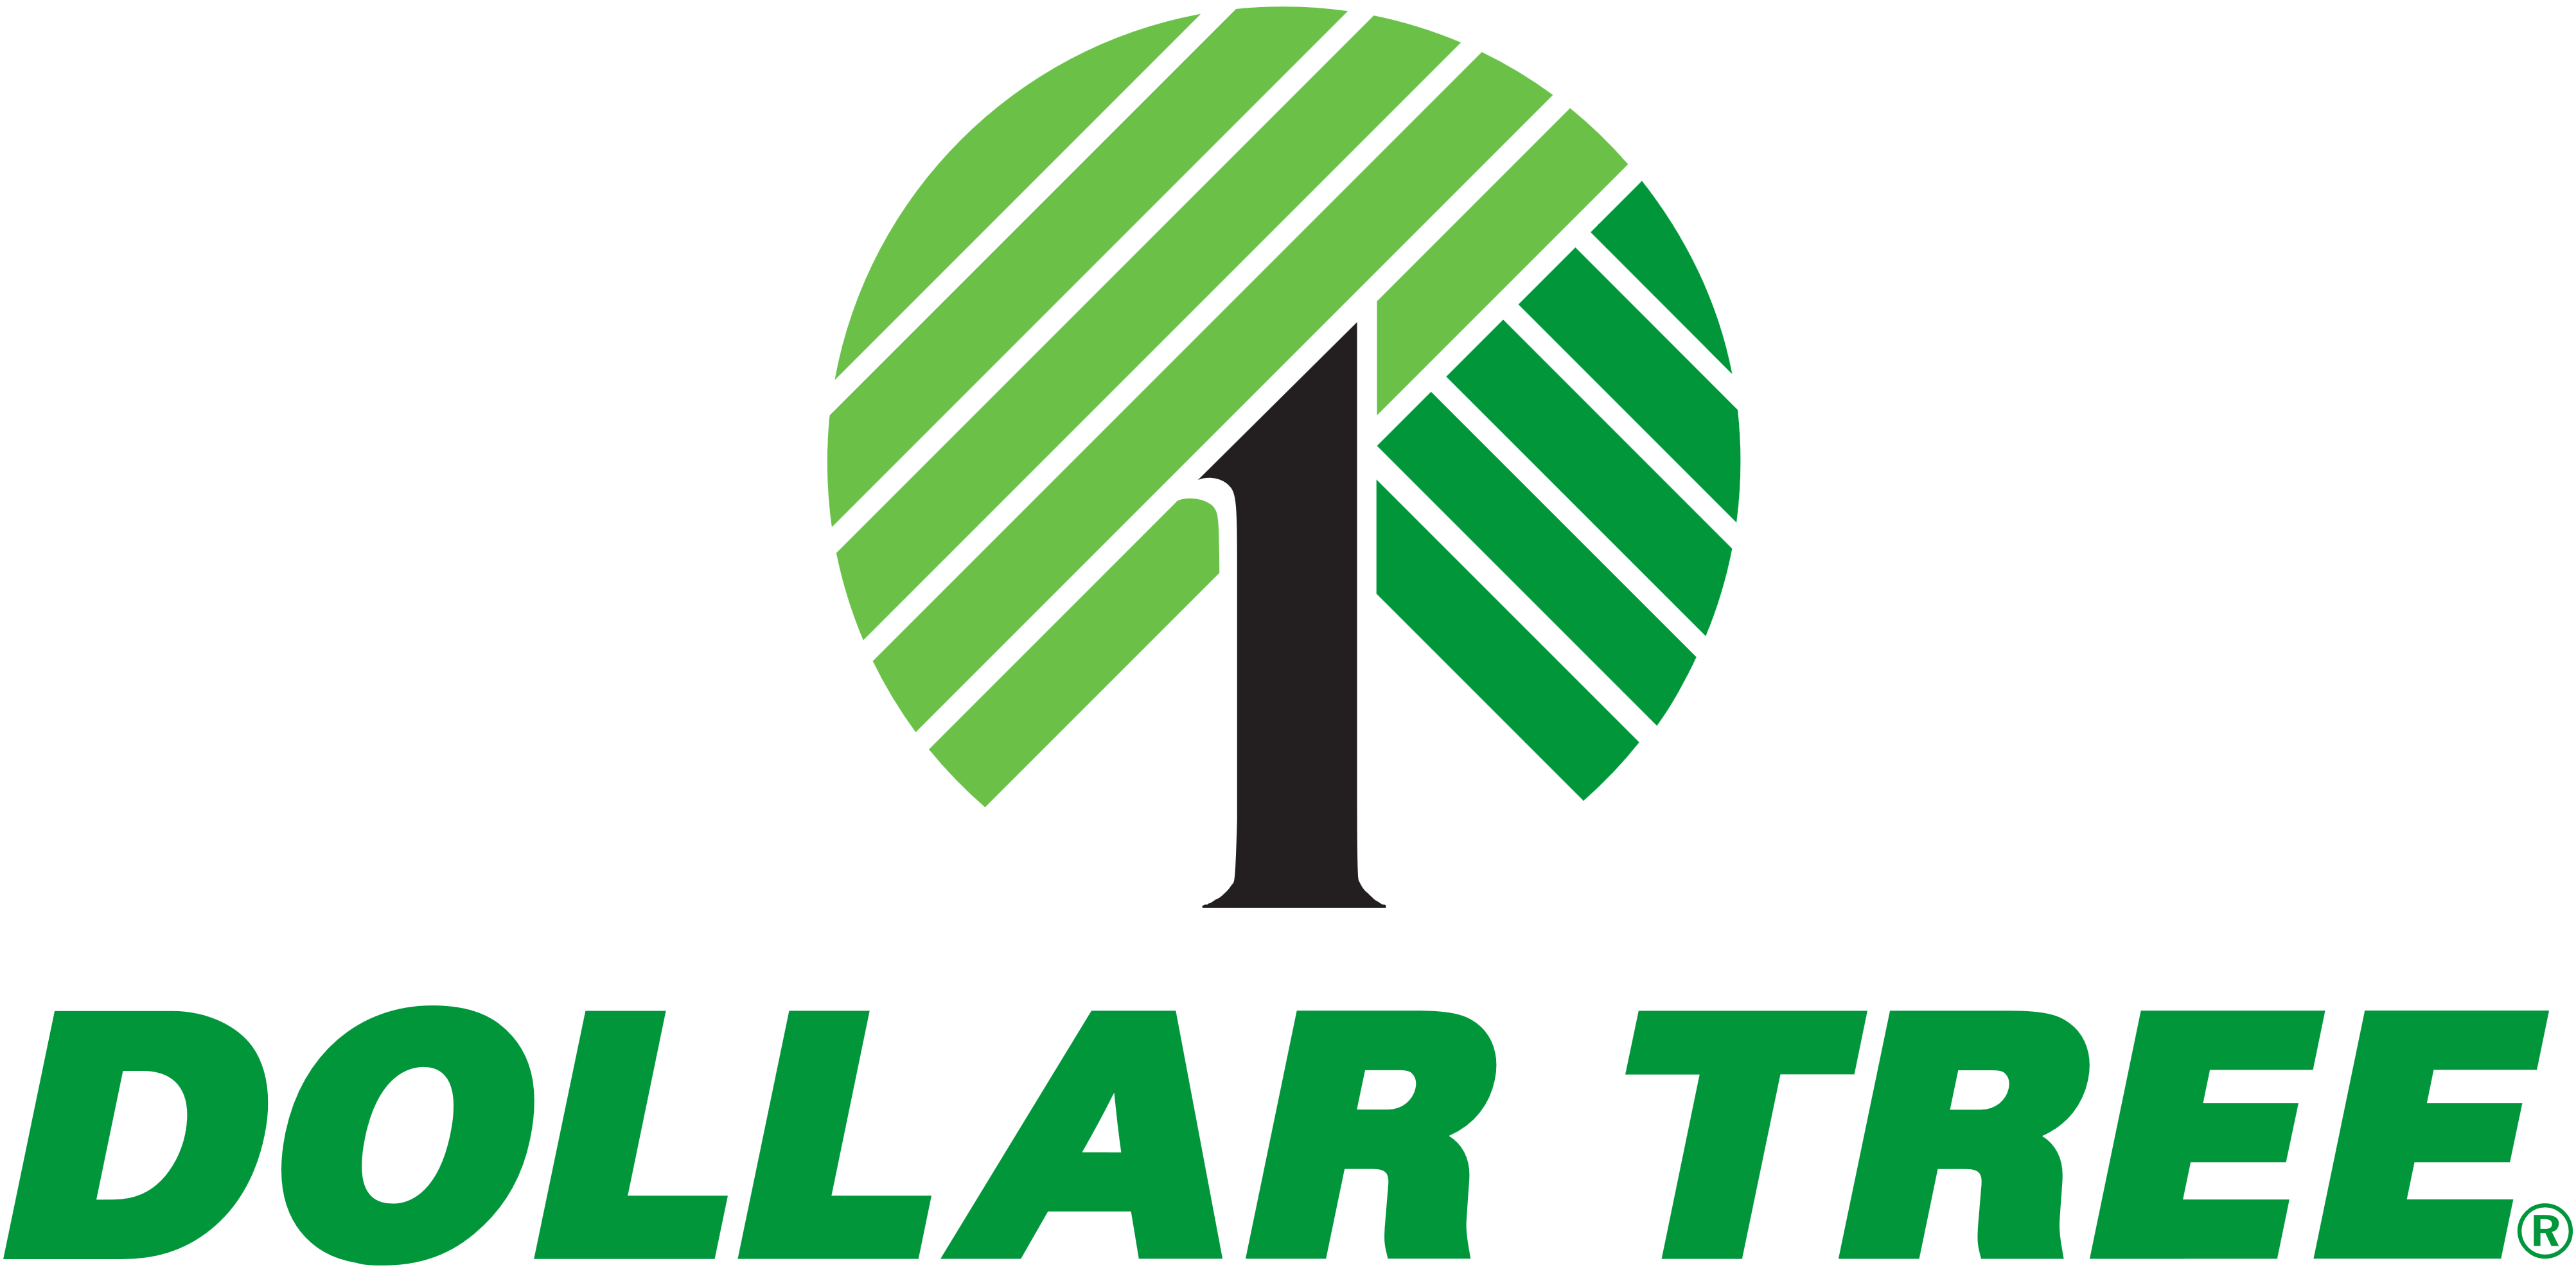 Inspiration Dollar Tree Logo Facts Meaning History And Png Logocharts Your 1 Source For 1481